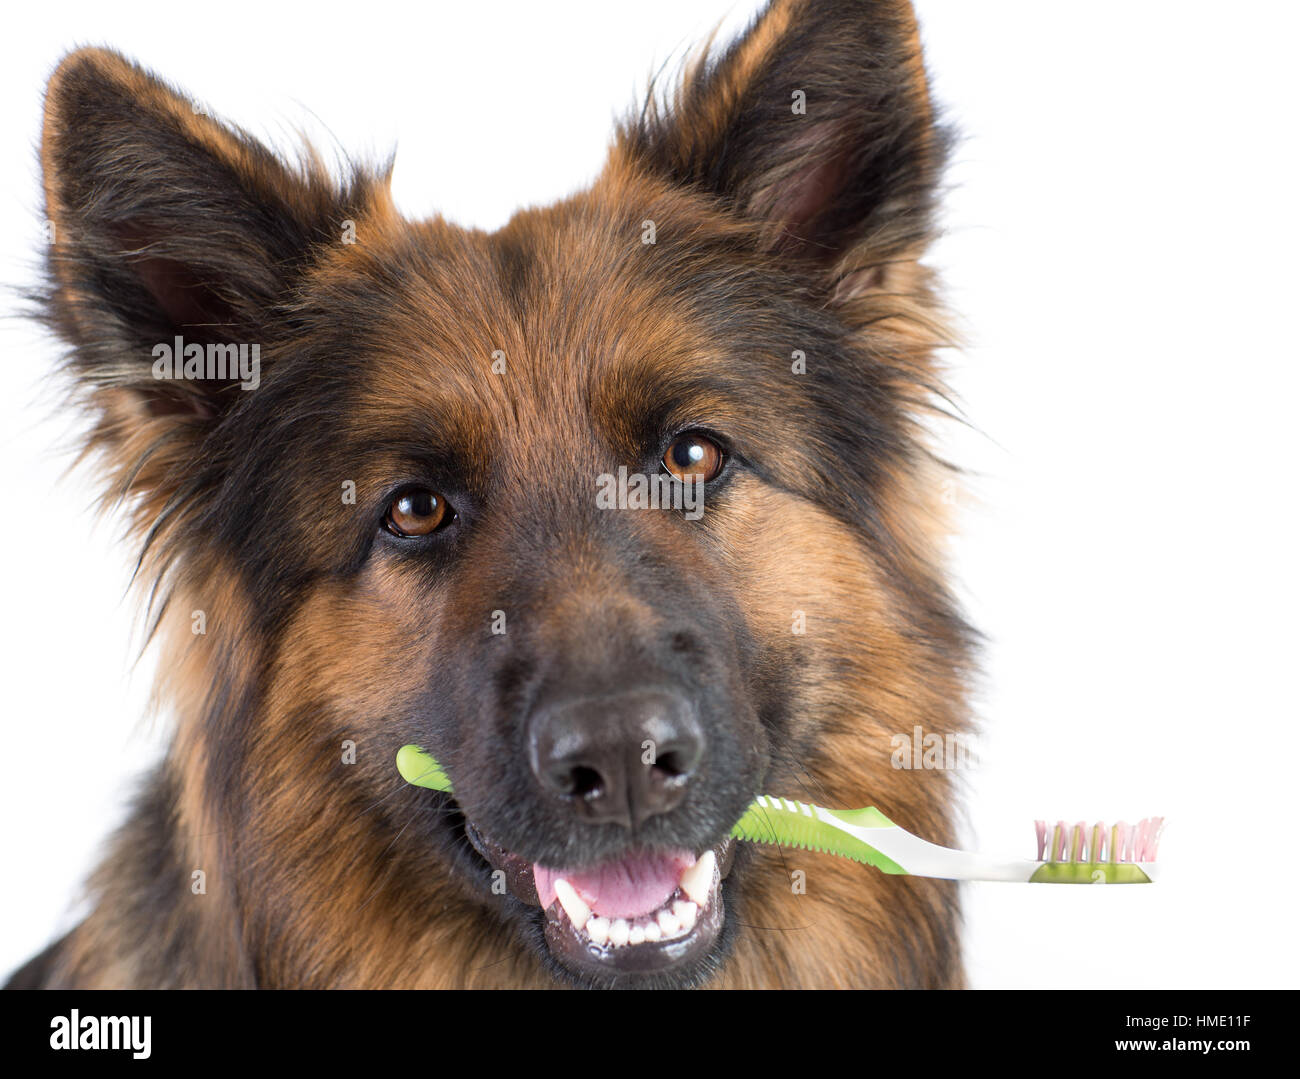 Dog holding toothbrush as dental hygiene concept Stock Photo